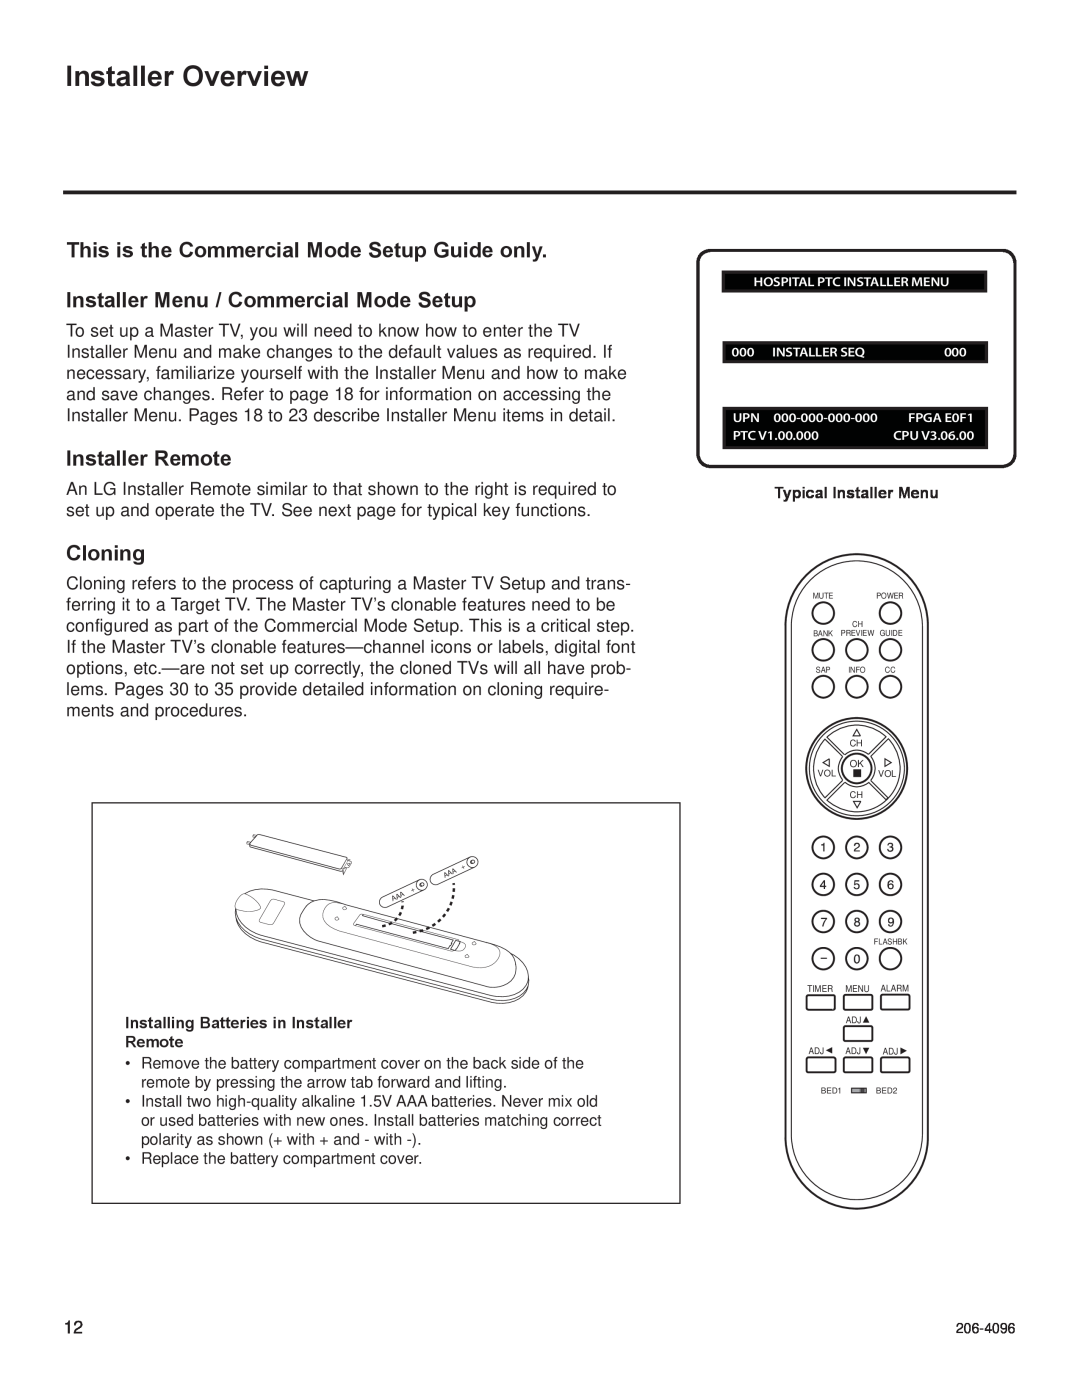 LG Electronics 32LG3DDH Installer Overview, This is the Commercial Mode Setup Guide only, Installer Remote, Cloning 